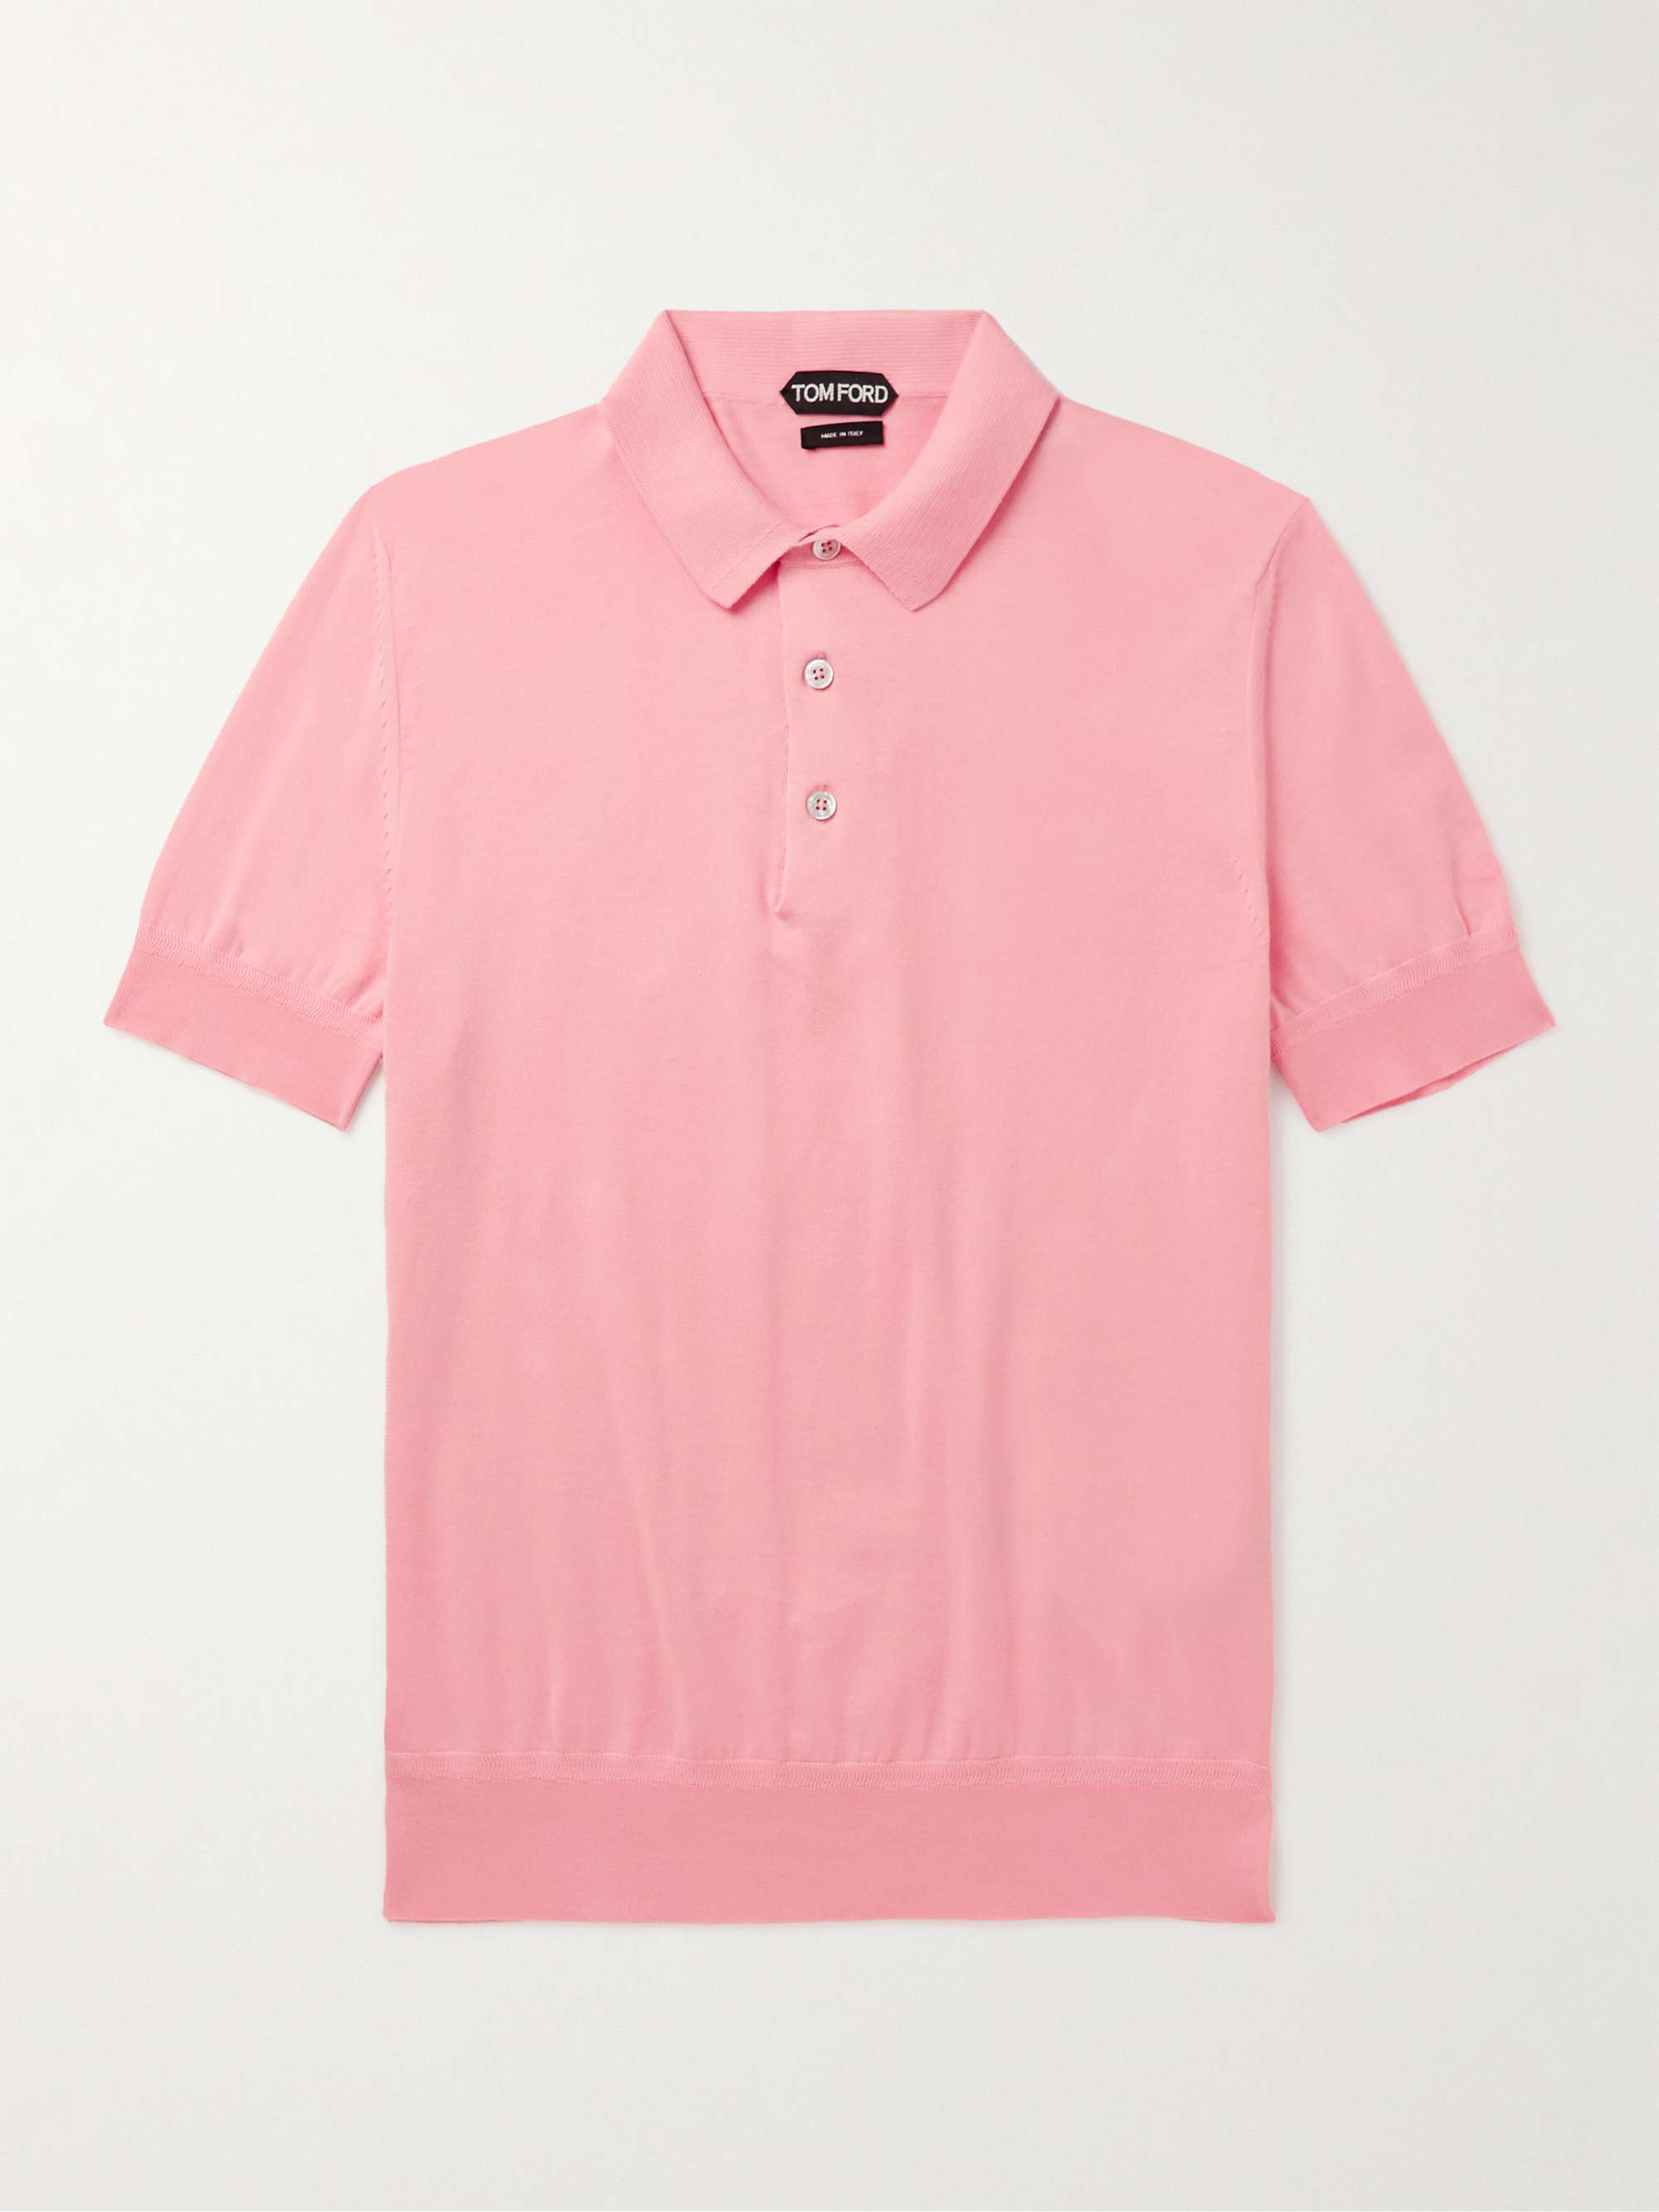 TOM FORD Slim-Fit Cashmere and Silk-Blend Polo Shirt